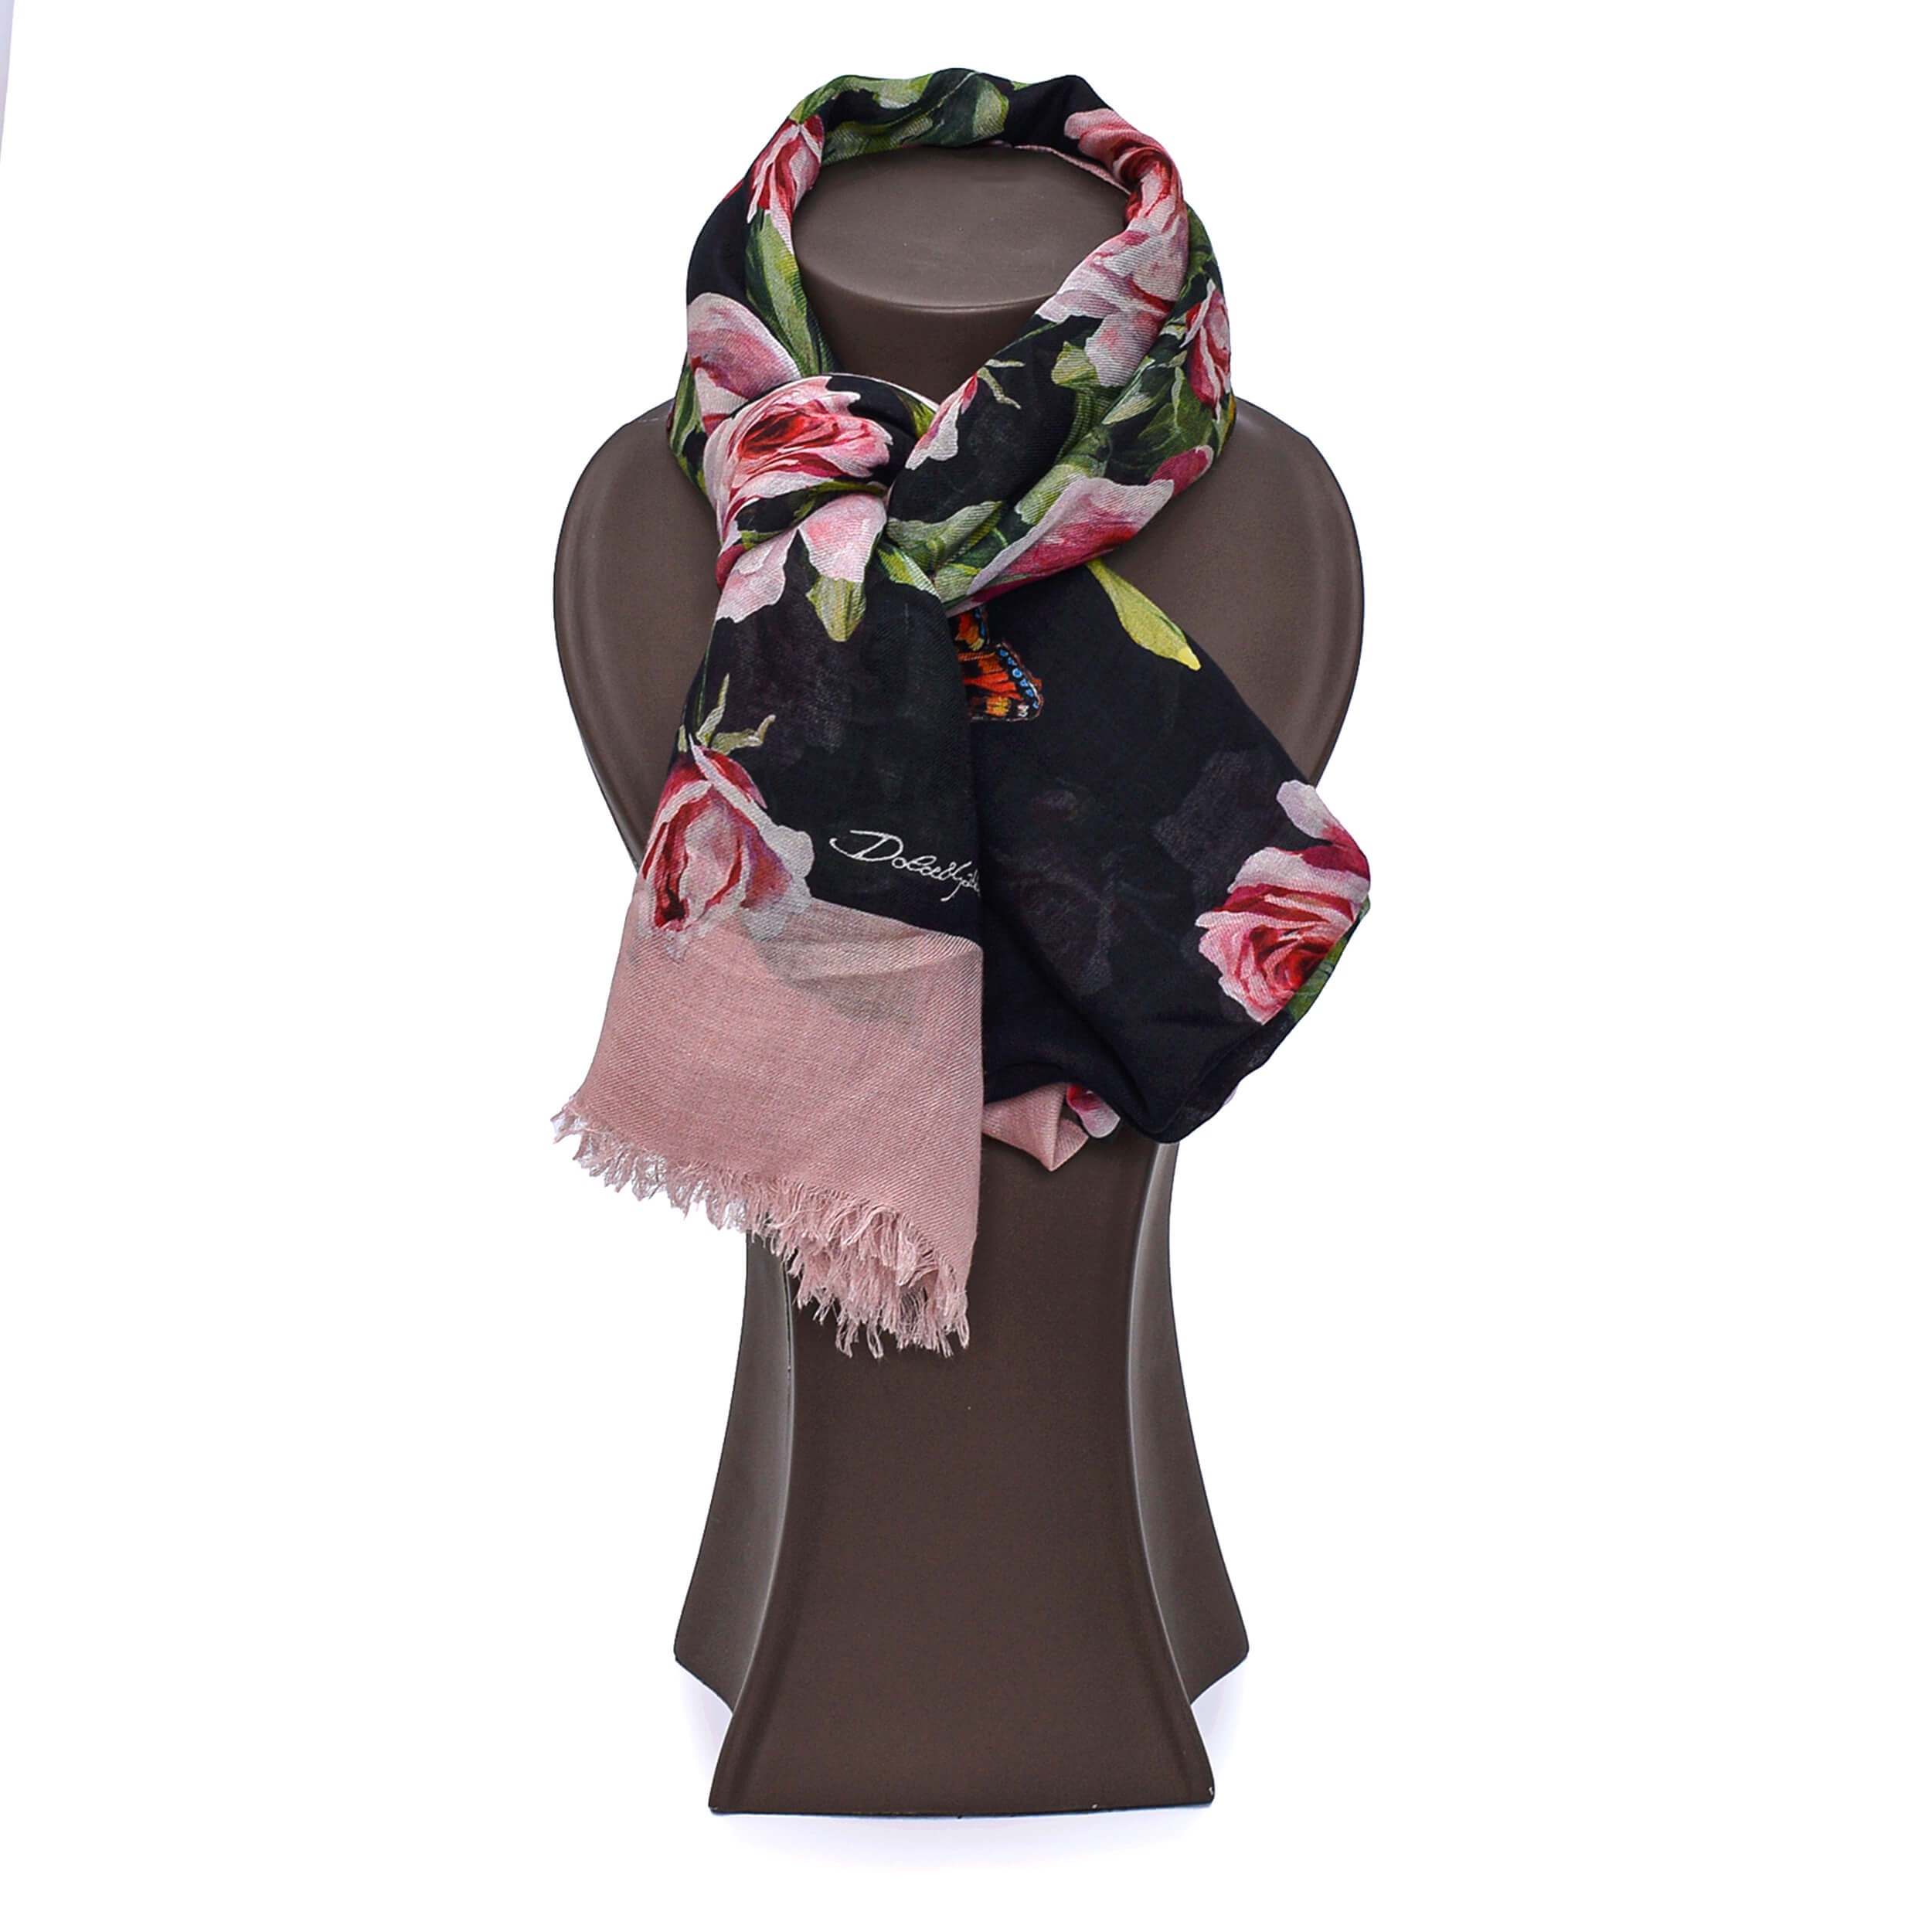 Dolce Gabbana- Pink and Black Floral Print Cotton and Cashmere Shawl